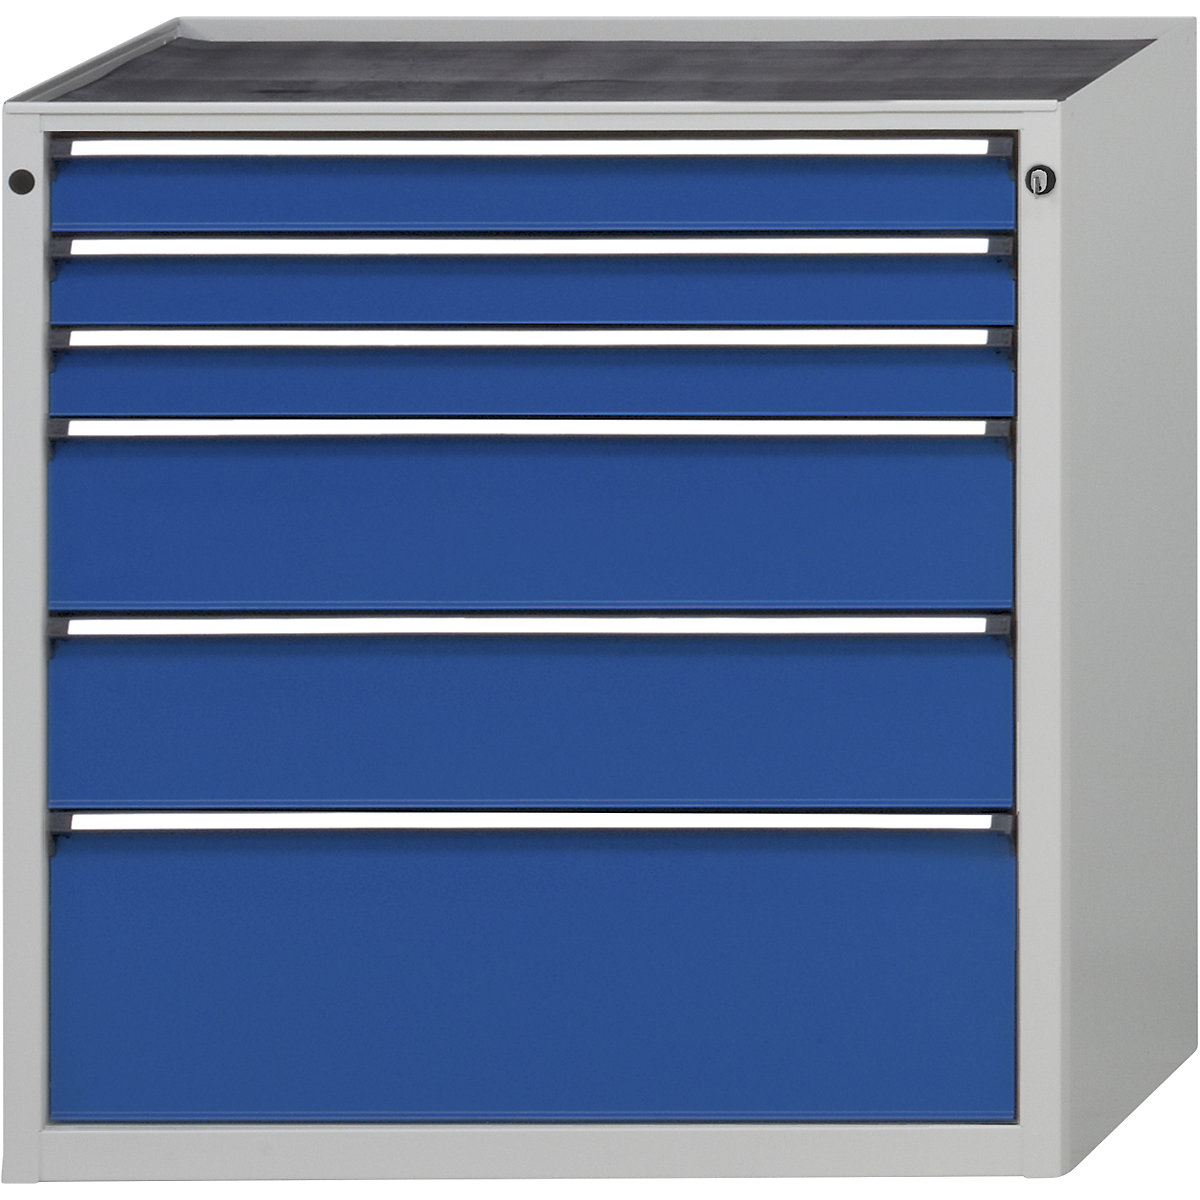 Drawer cupboard without worktop – ANKE, width 910 mm, 6 drawers, front in gentian blue-5